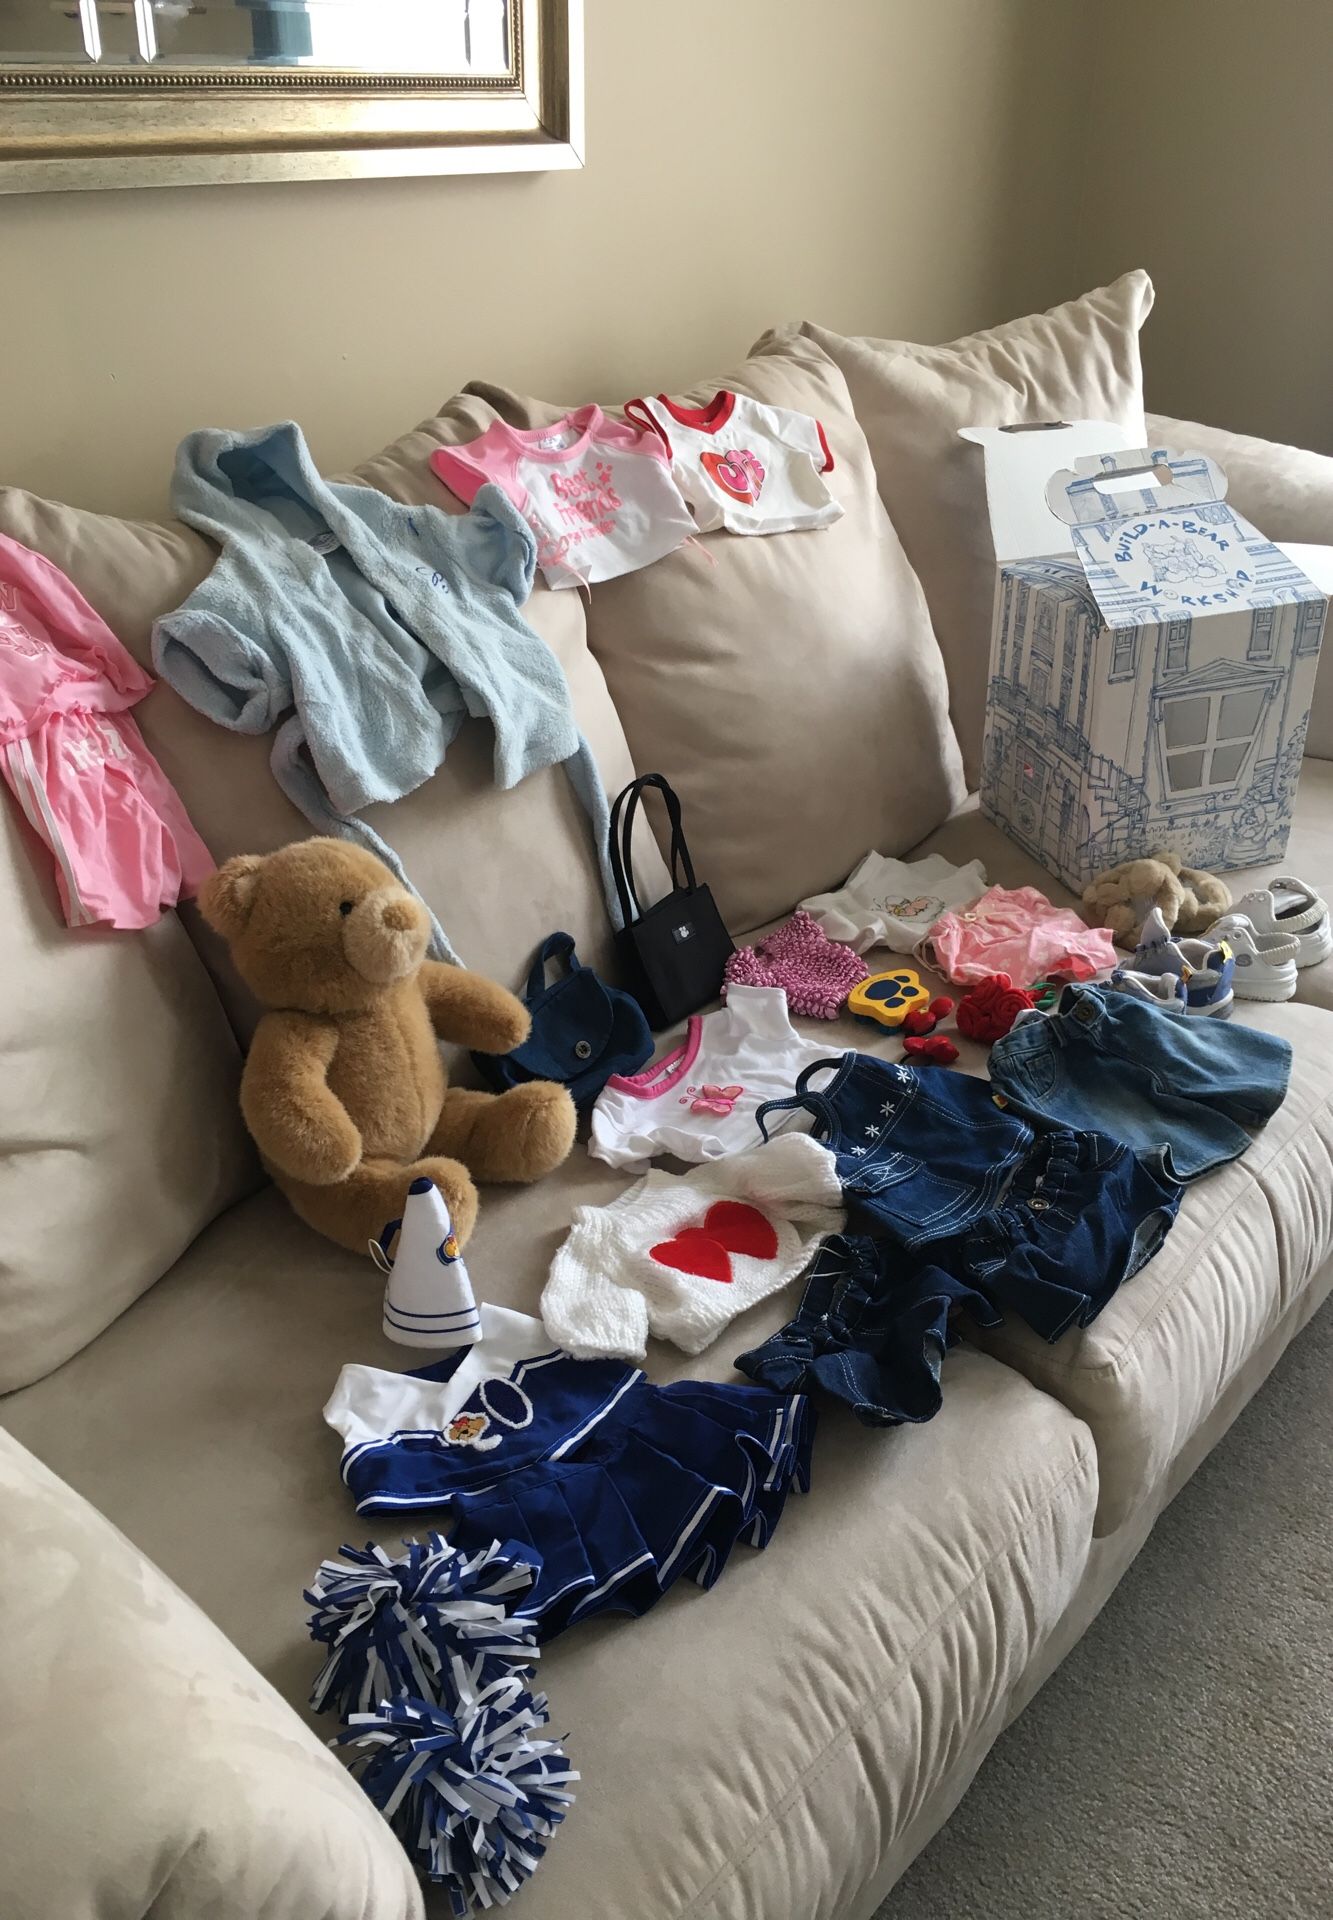 Build A Bear and accessories